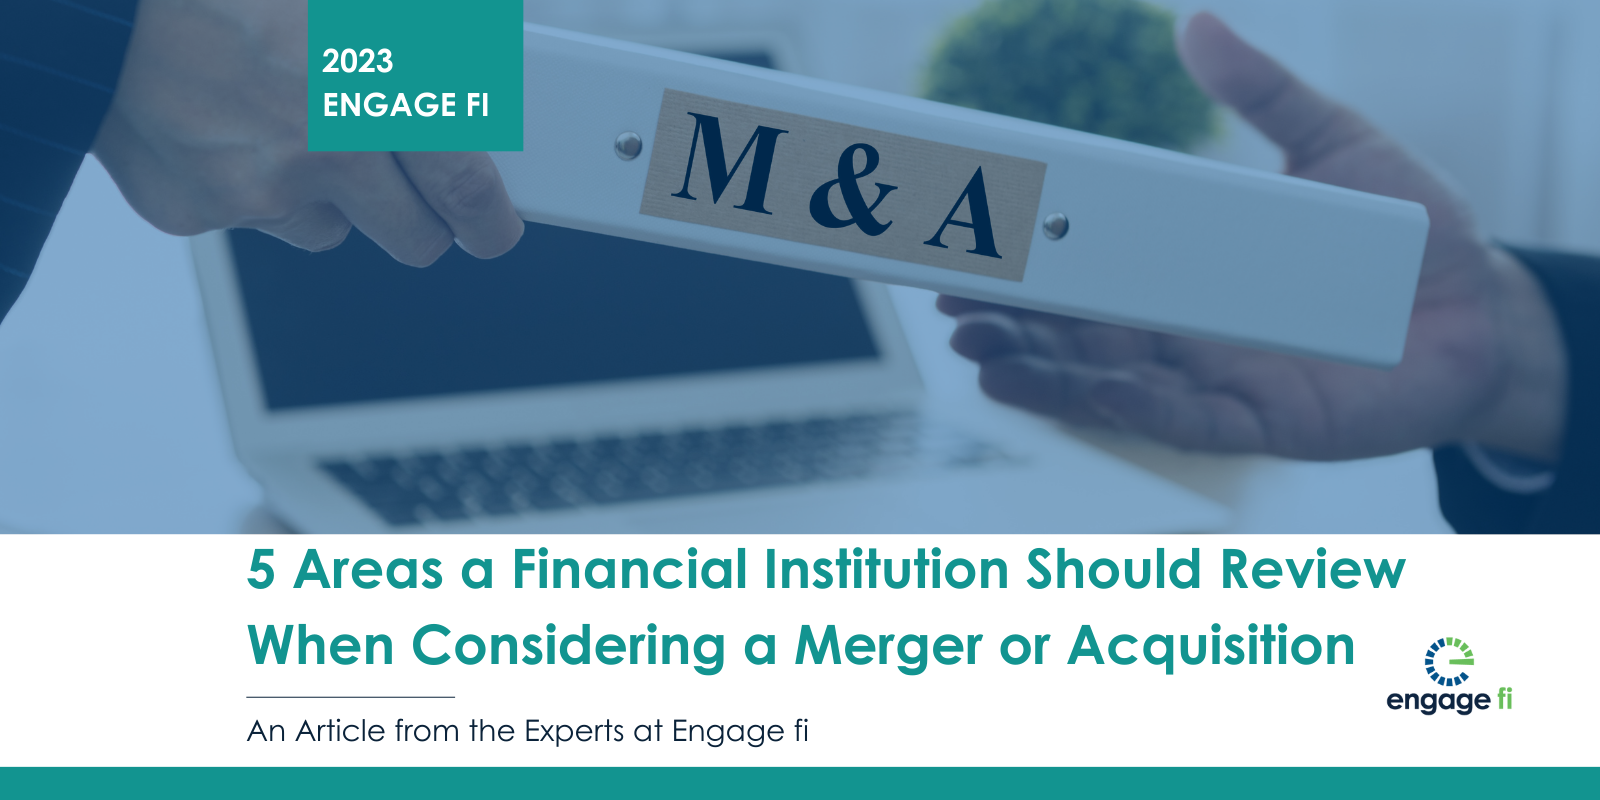 5 Areas a Financial Institution Should Review When Considering a Merger or Acquisition